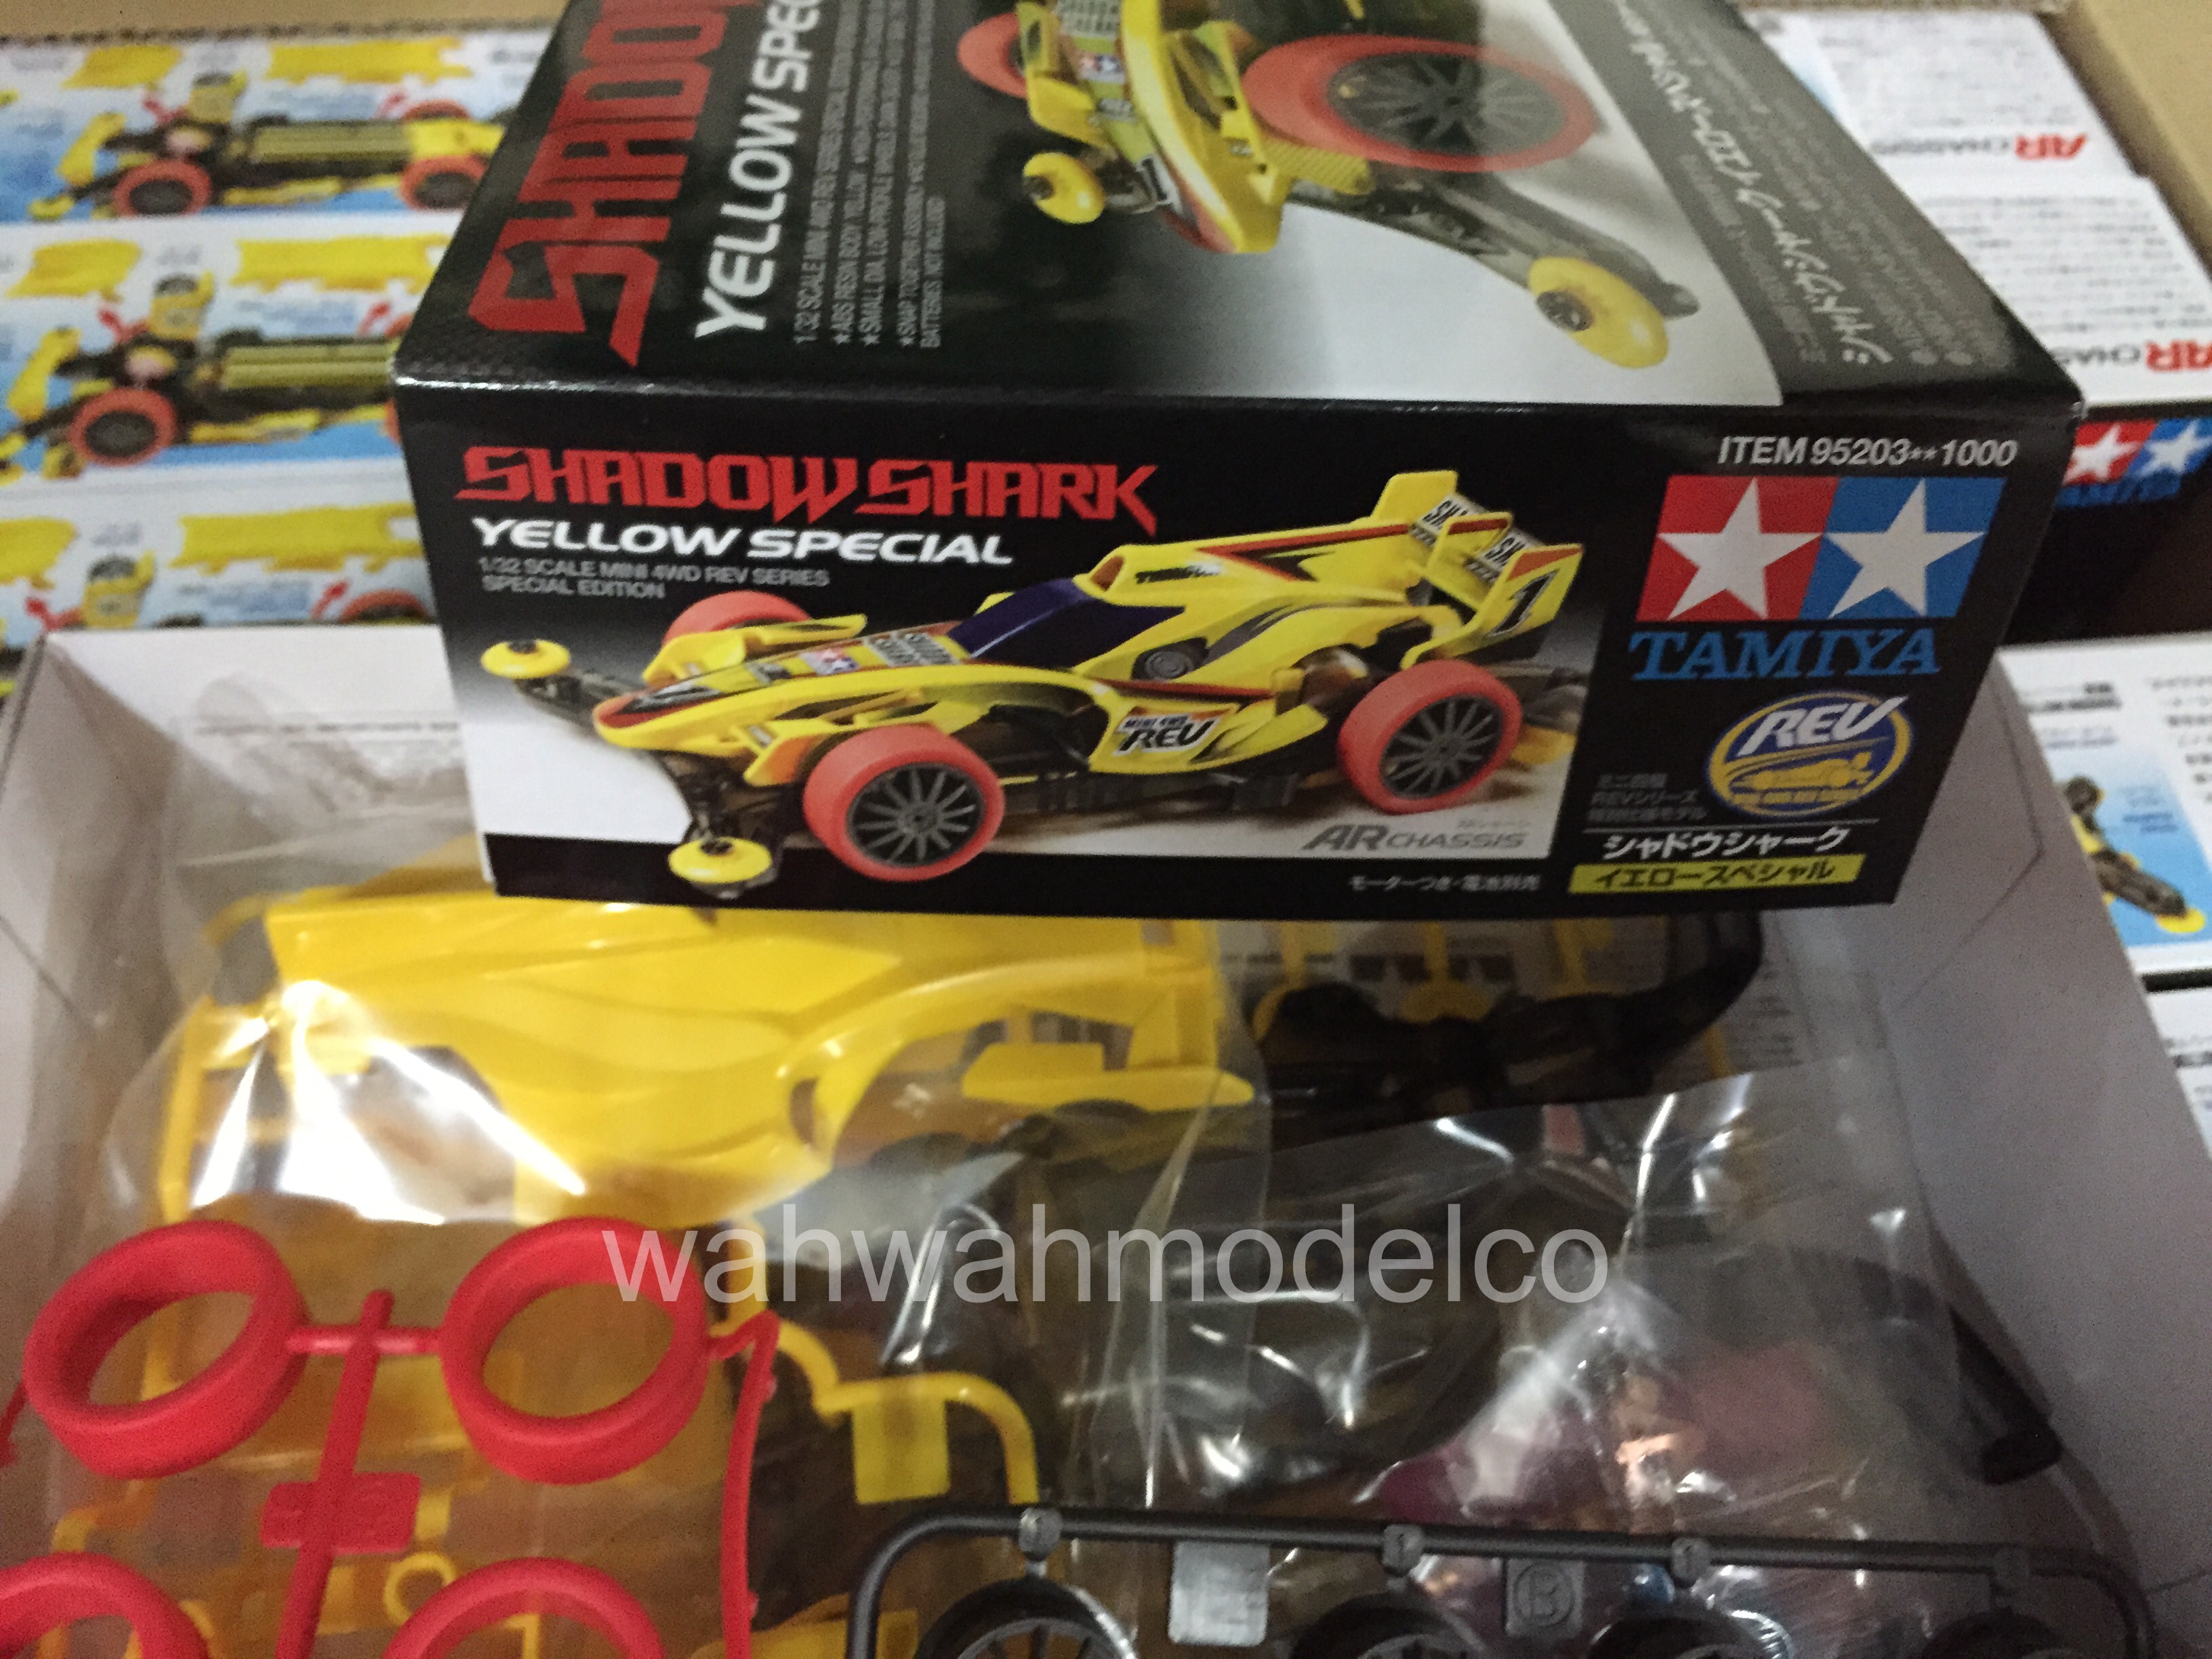 Tamiya 95203 Mini 4wd Shadow Shark Yellow Special AR Chassis 1/32 Japan for sale online